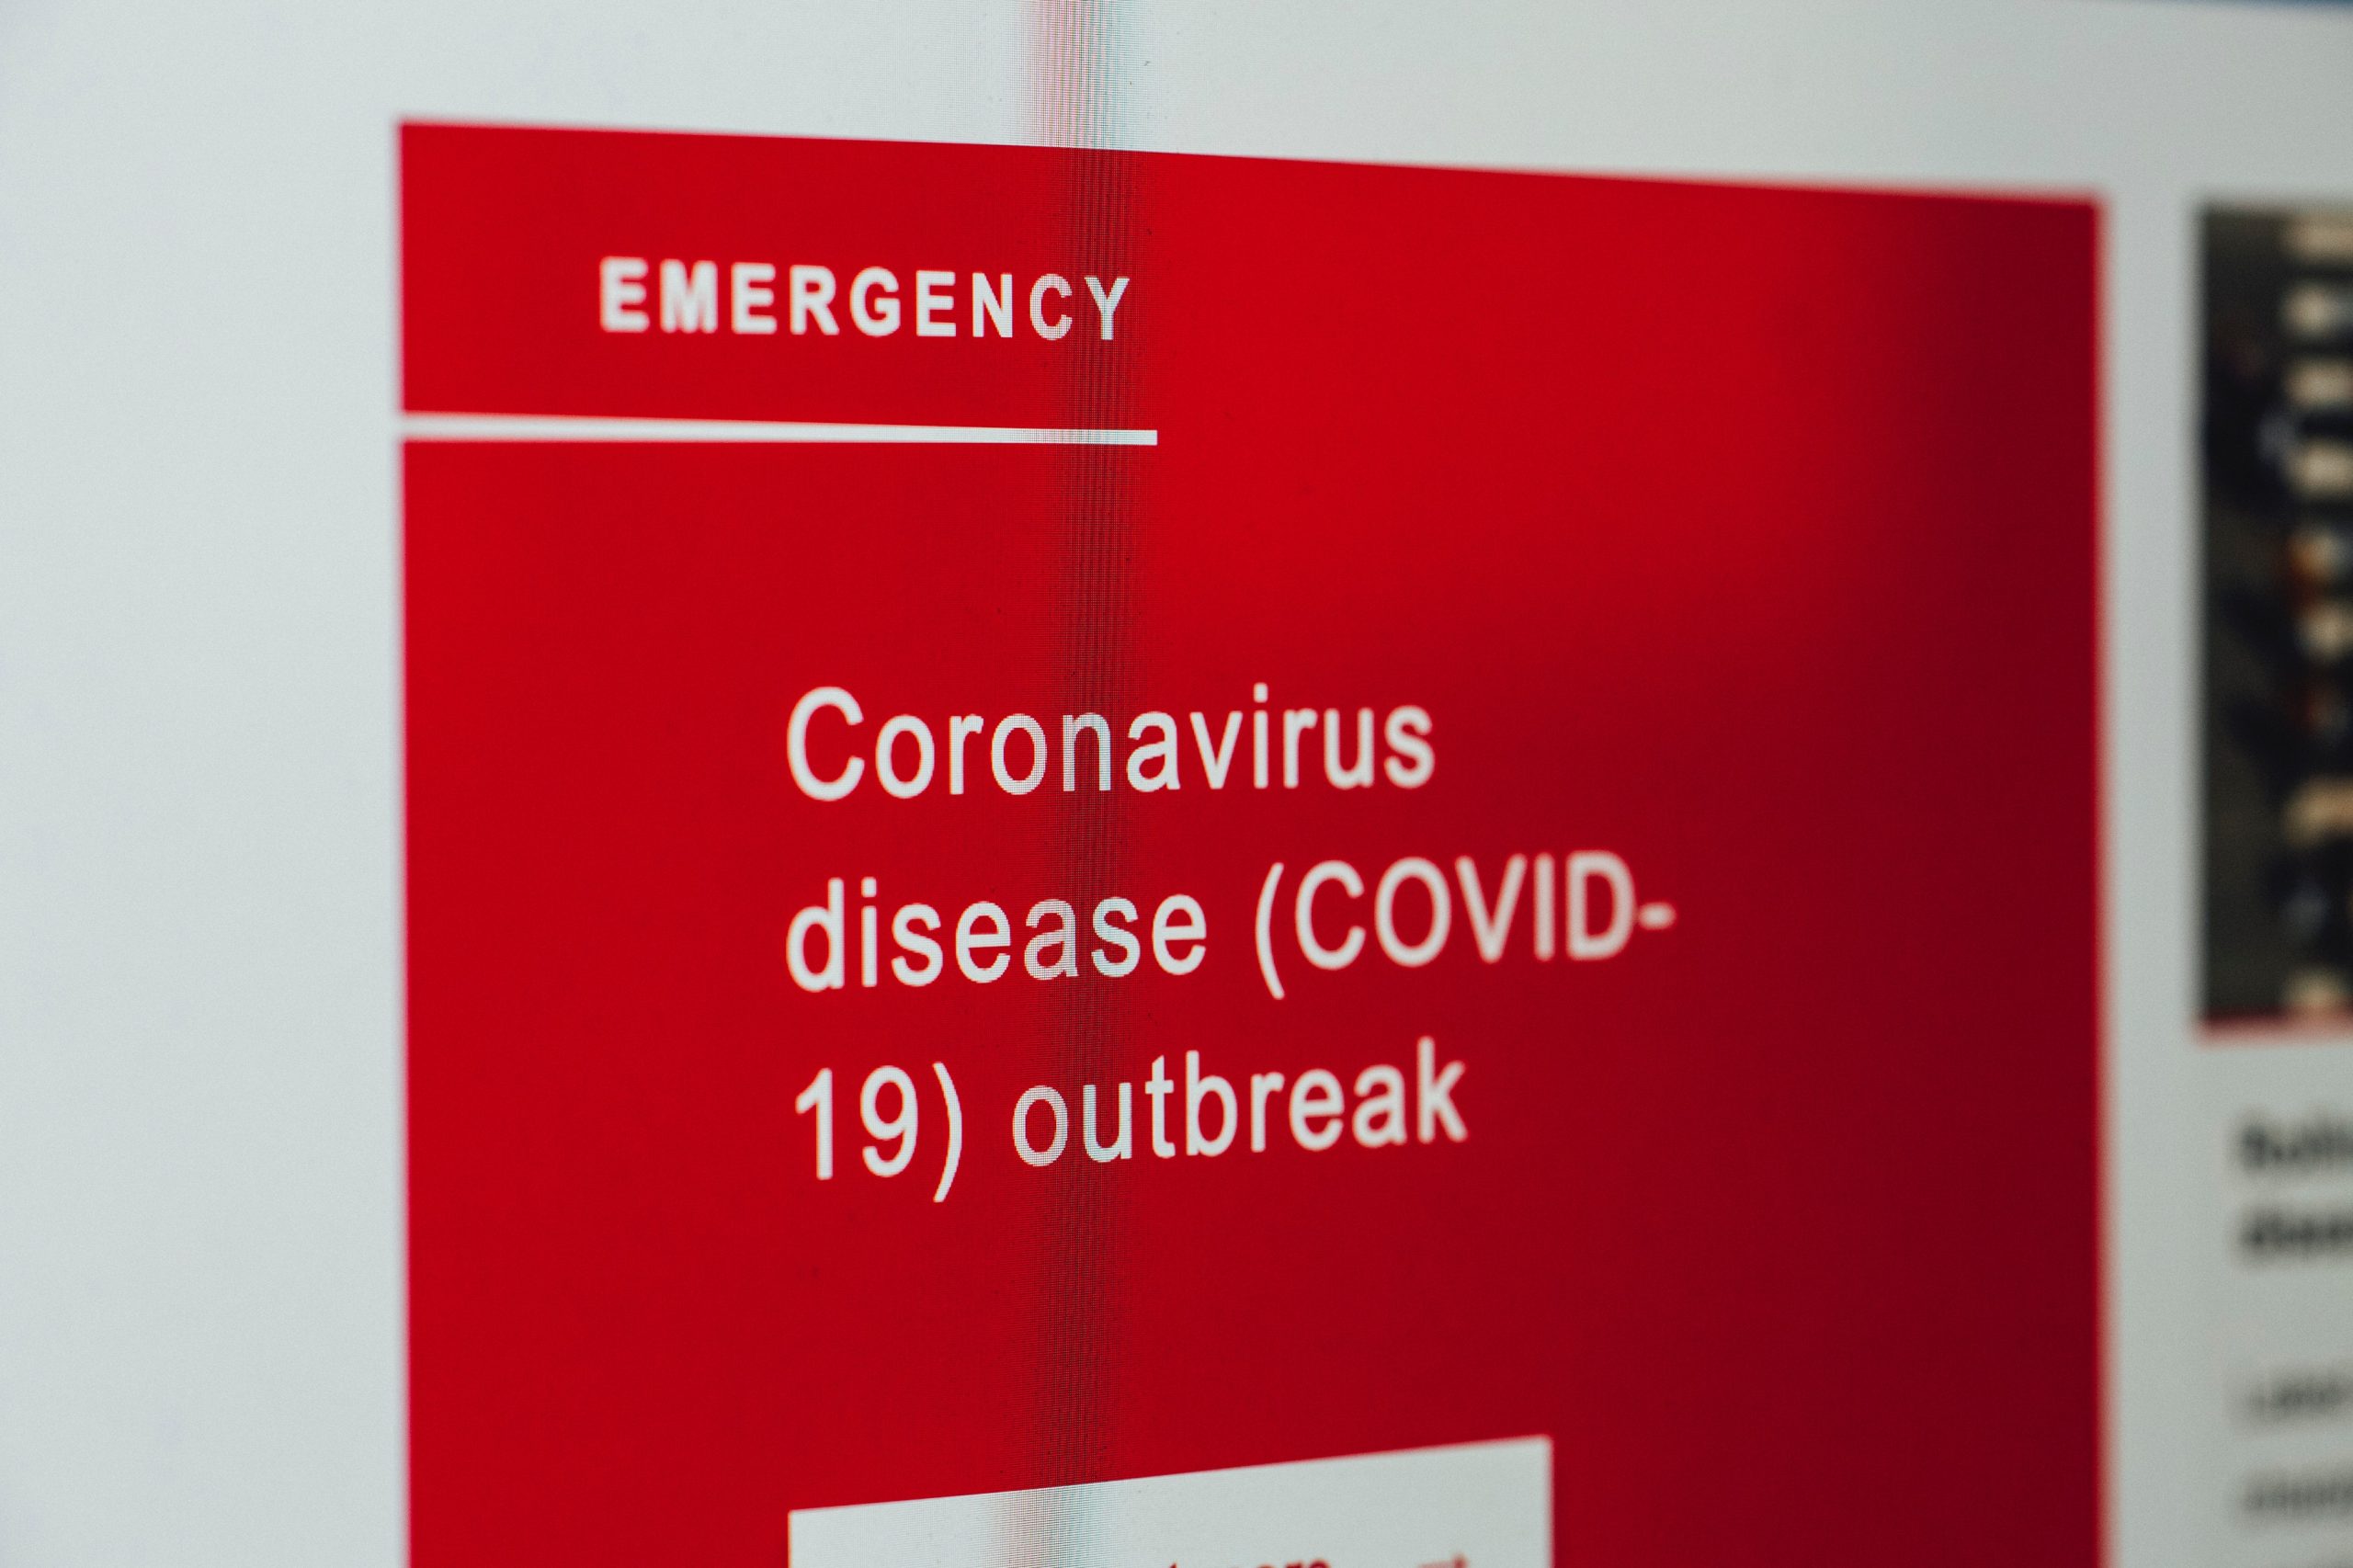 Indonesia increases public funding for hospitals in critical condition due to Covid-19